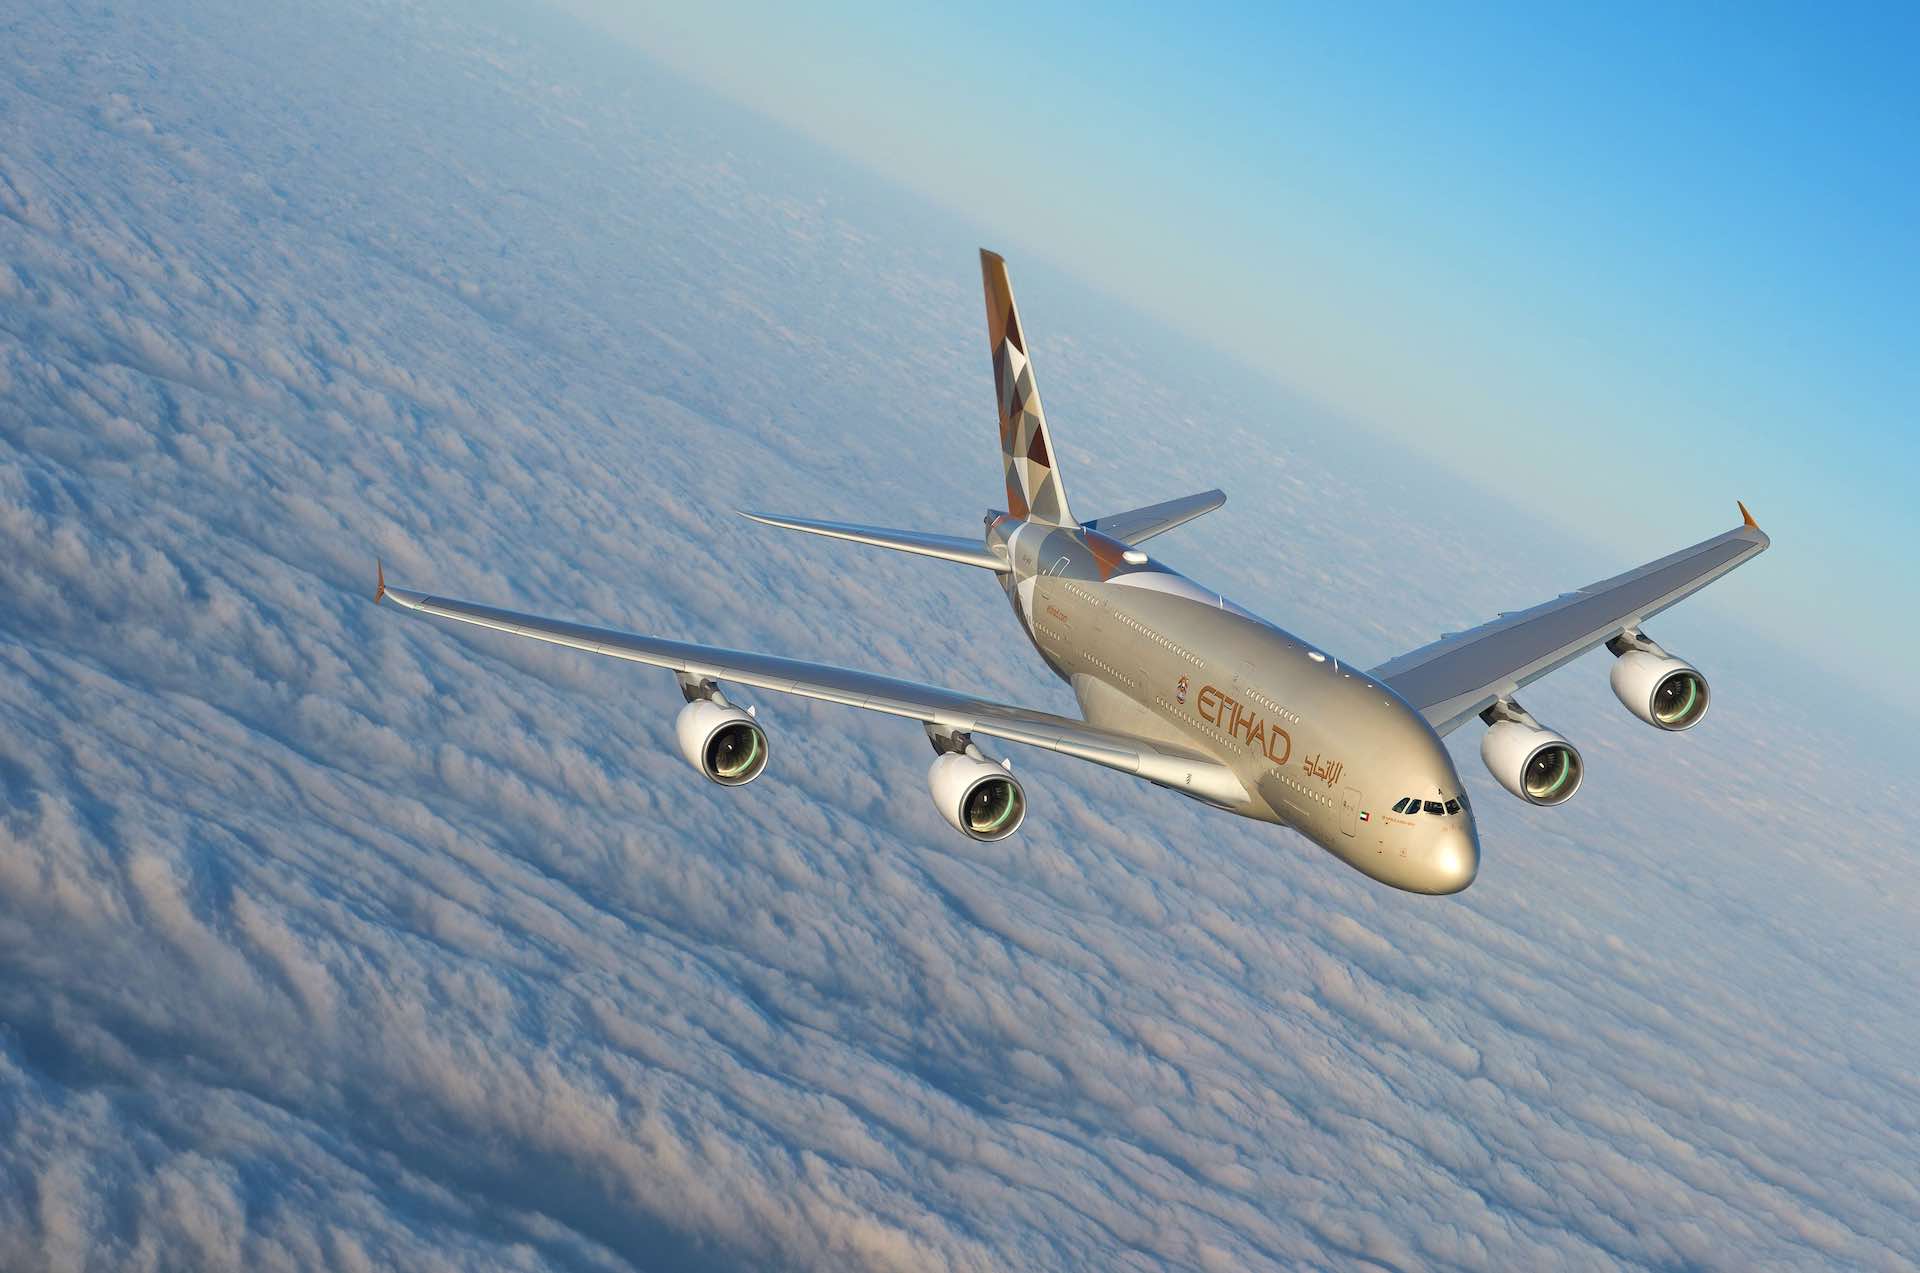 Etihad Airways is rated among the most punctual airlines in the world